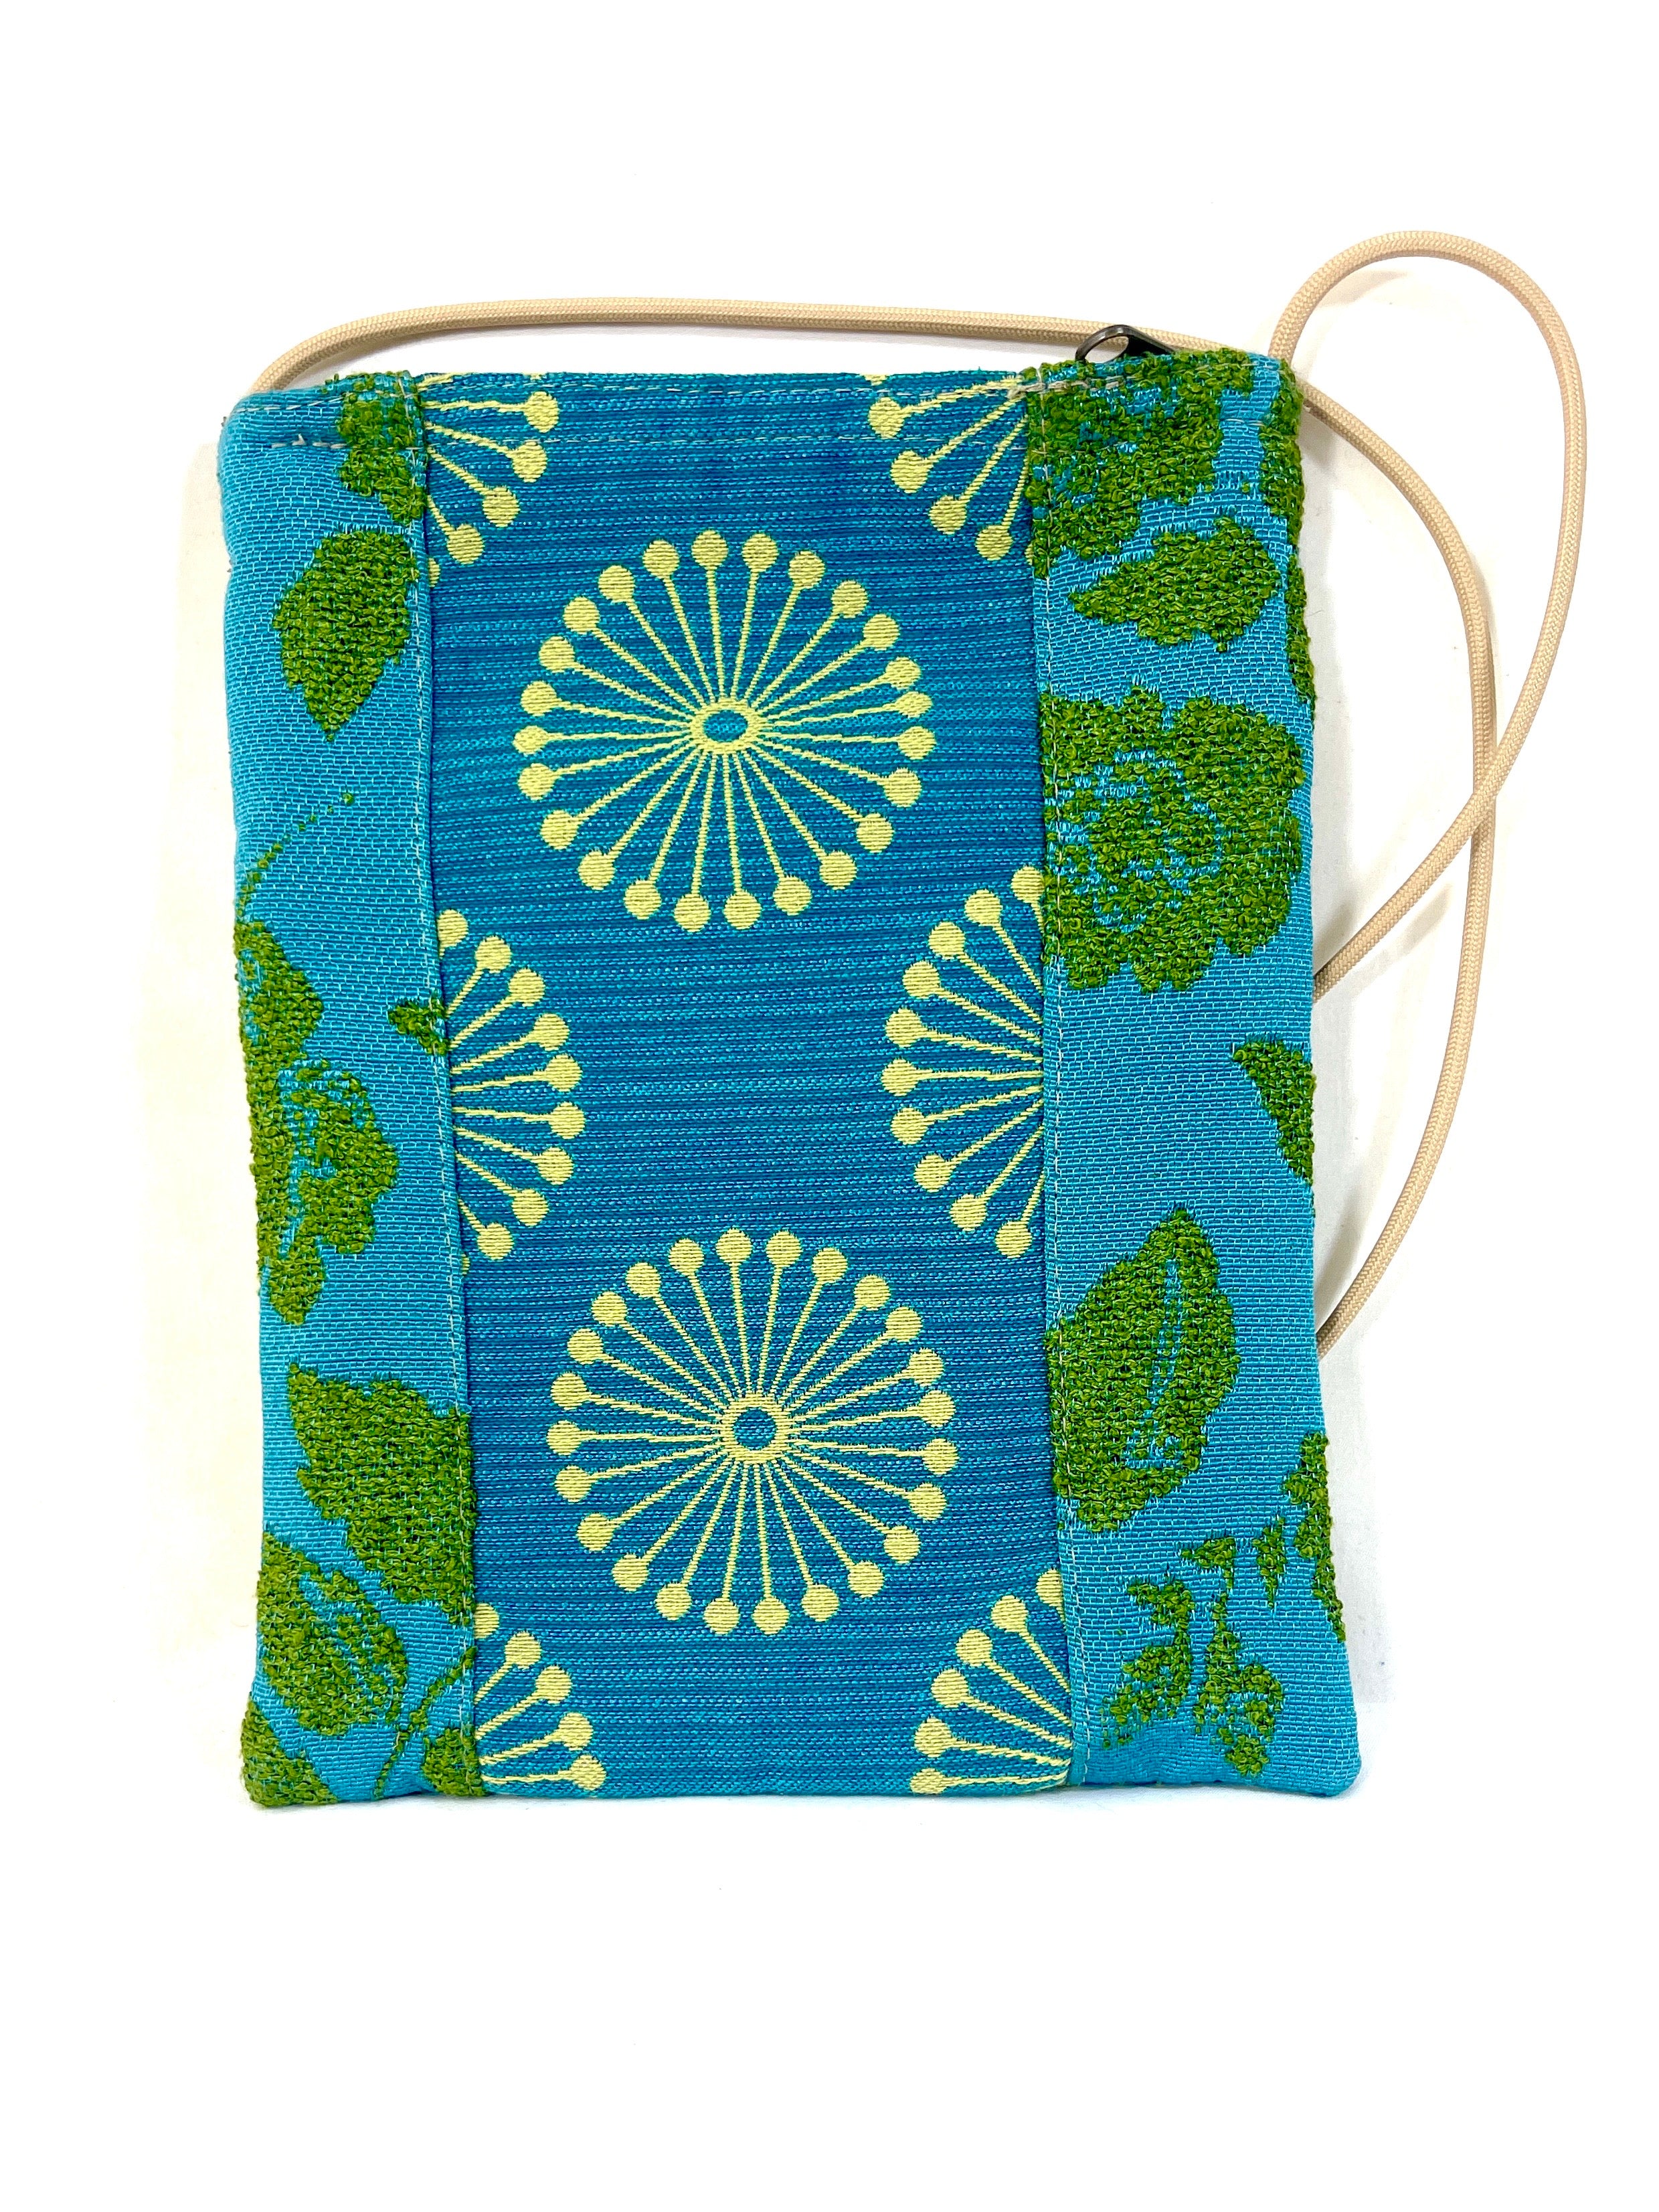 Patch Purse in Turquoise Pinwheel with Coordinating Weaves